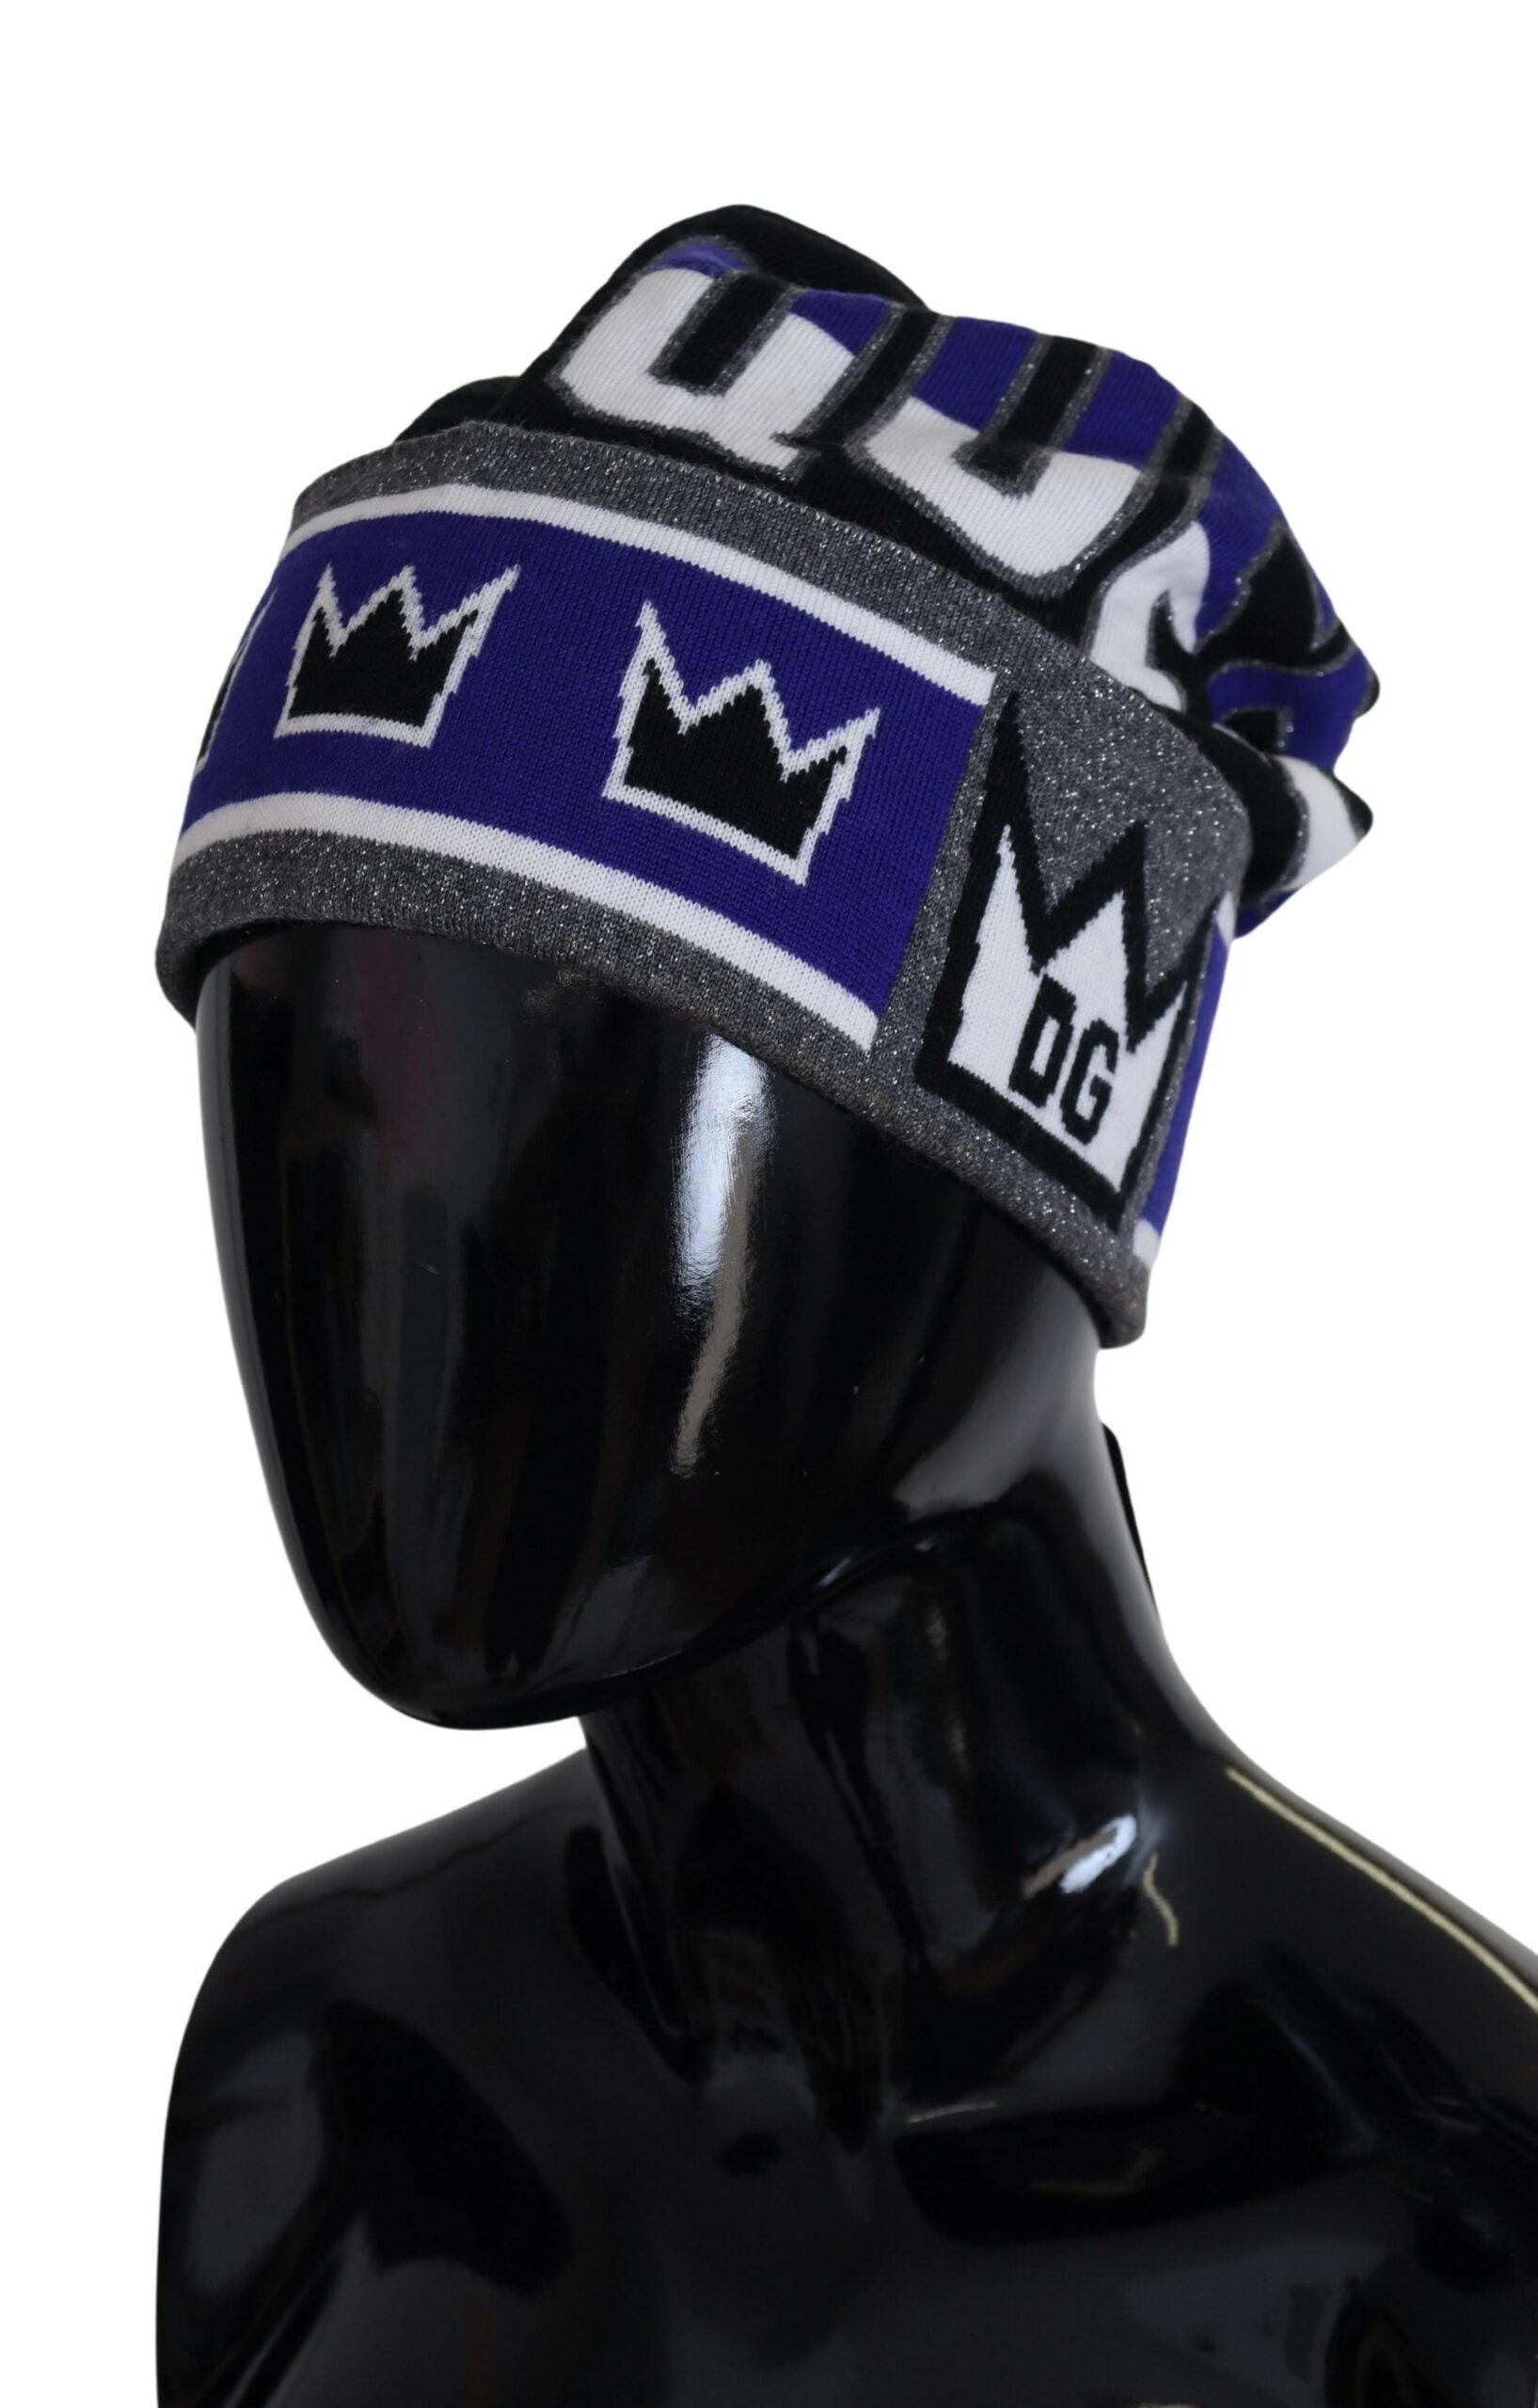 Dolce & Gabbana Multicolor Wool Blend Beanie with Queen Logo